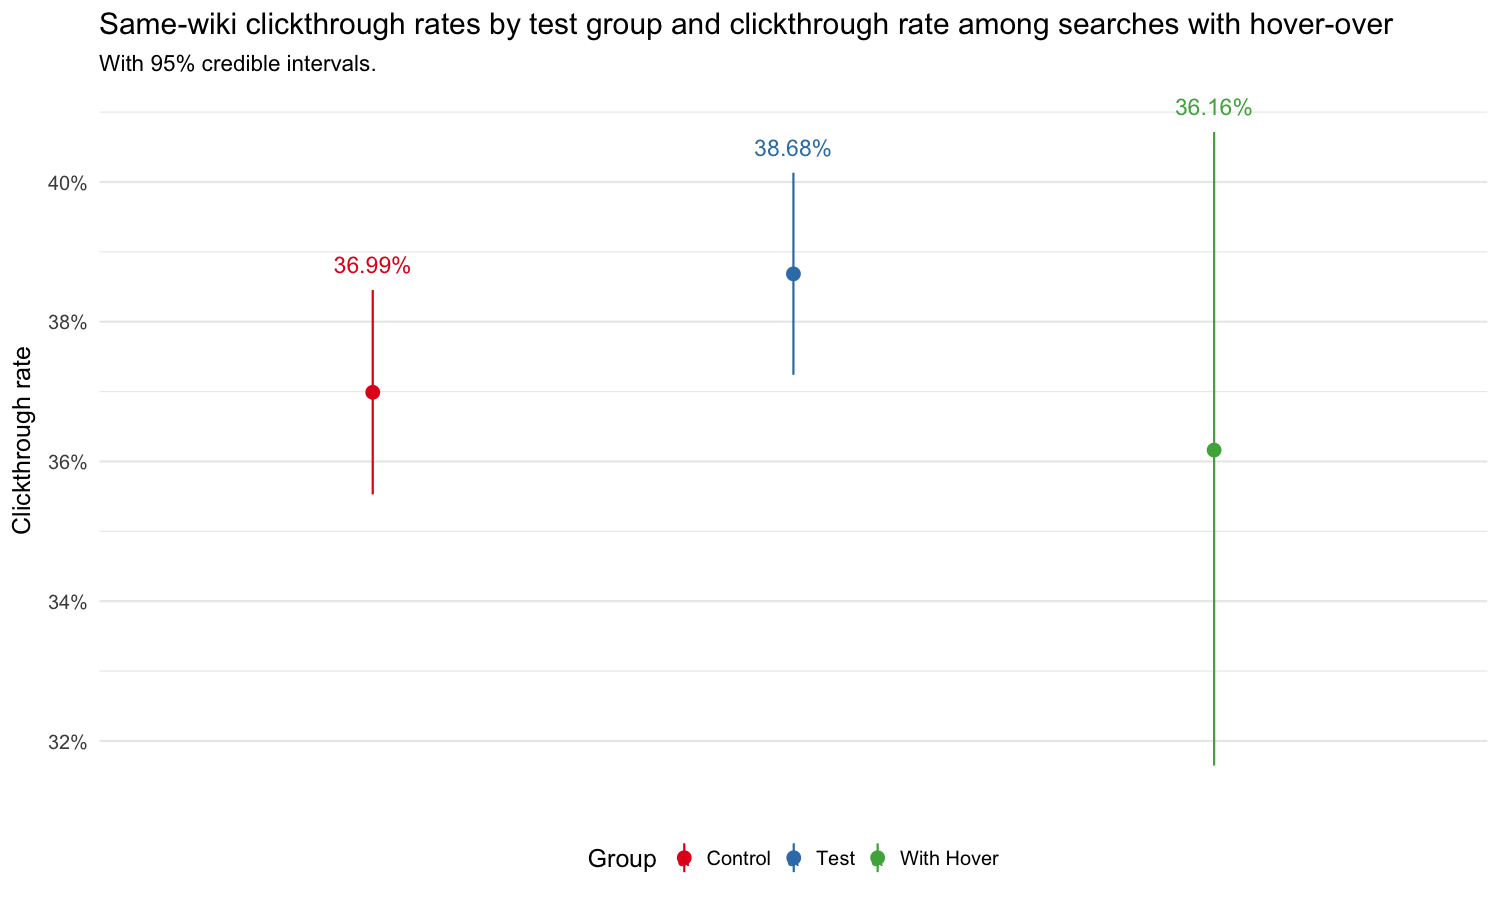 **Figure 5**: Clickthrough rates of experimental groups and clickthrough rate among searches with hover-over.